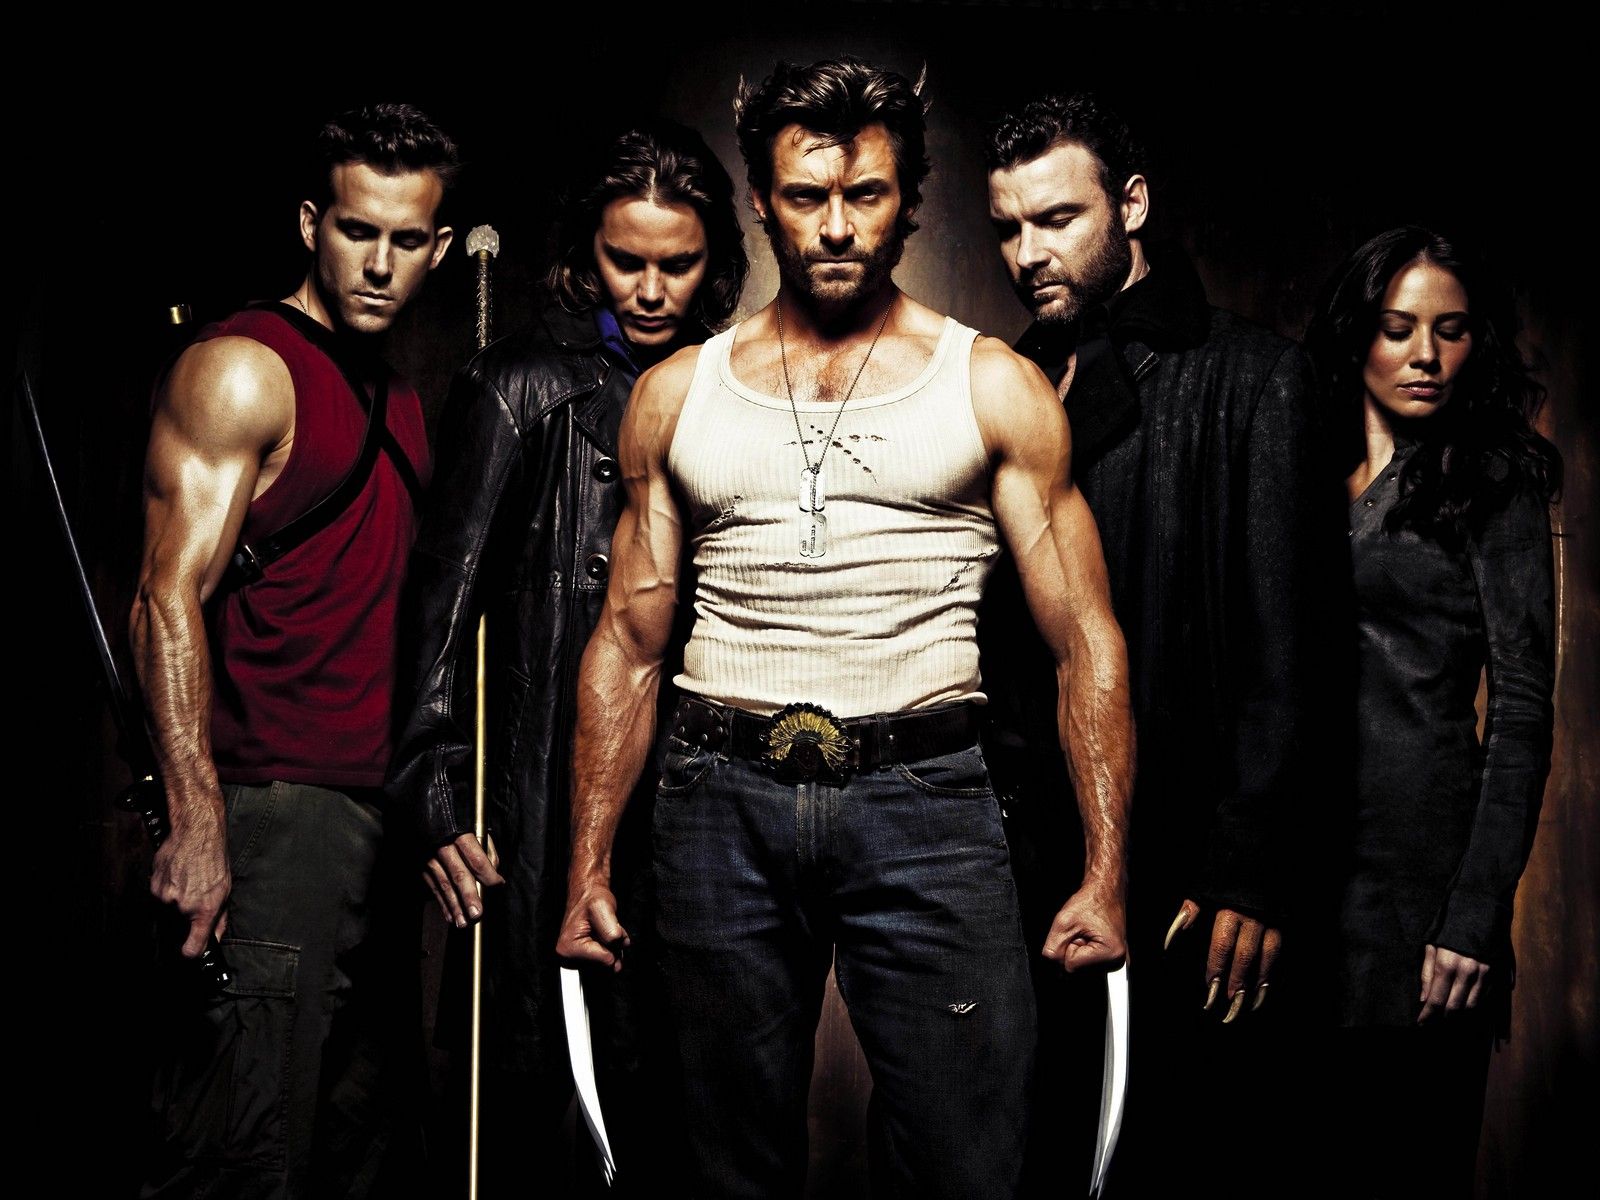 Wallpapers Tagged With WOLVERINE | WOLVERINE HD Wallpapers | Page 1